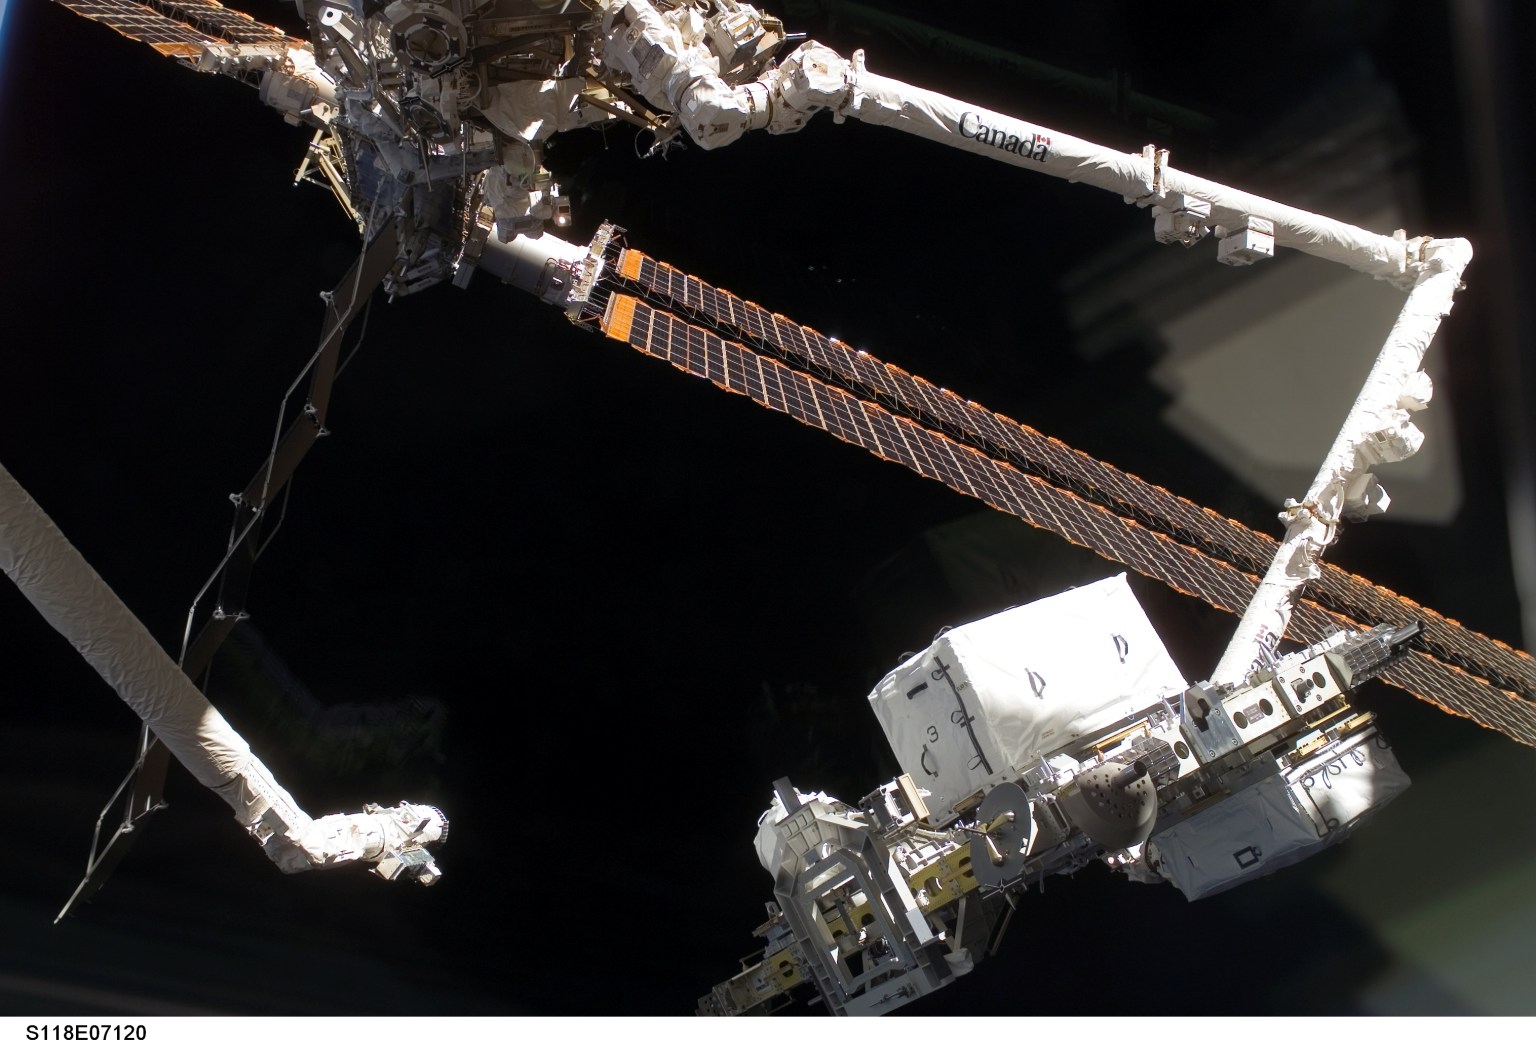 The Space Shuttle Endeavour's Remote Manipulator System (RMS) robotic arm (left) moves away following the hand-off of an external stowage platform (ESP-3) to the station's robotic arm while docked with the International Space Station. Astronauts Tracy Caldwell and Barbara R. Morgan, both STS-118 mission specialists, were at inside at Endeavour's controls as the shuttle's robotic arm lifted the storage platform from the cargo bay to hand it over to the station's robotic arm, also known as Canadarm2. Astronauts Charlie Hobaugh, pilot, and Clay Anderson, Expedition 15 flight engineer, then used the Canadarm2 to attach the 13-by-7-foot platform to the station's Port 3 truss.